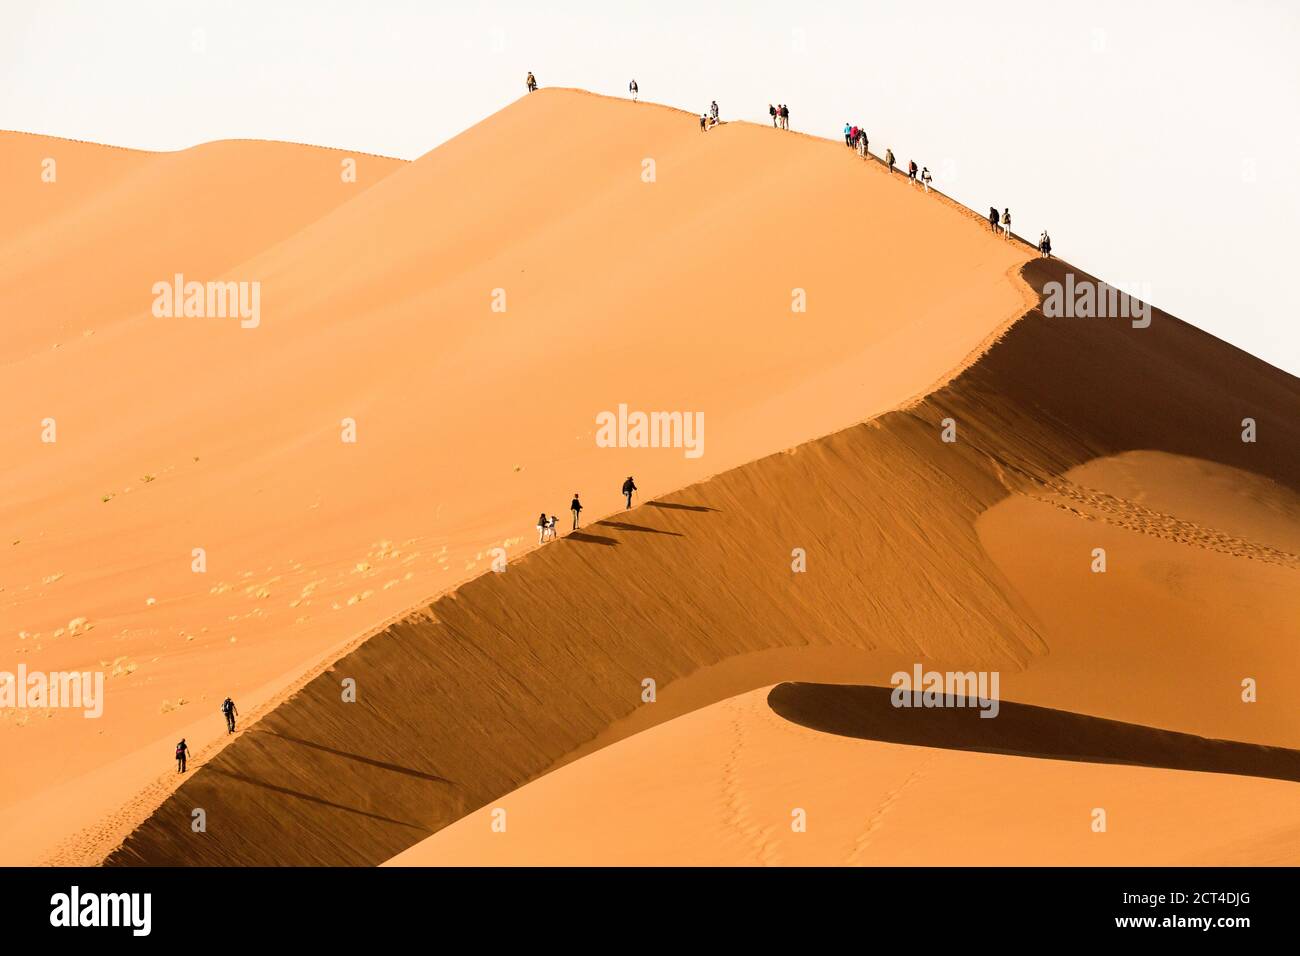 Tourists climb the largest sand dune in Sossusvlei, Sesrium, Namibia. Stock Photo